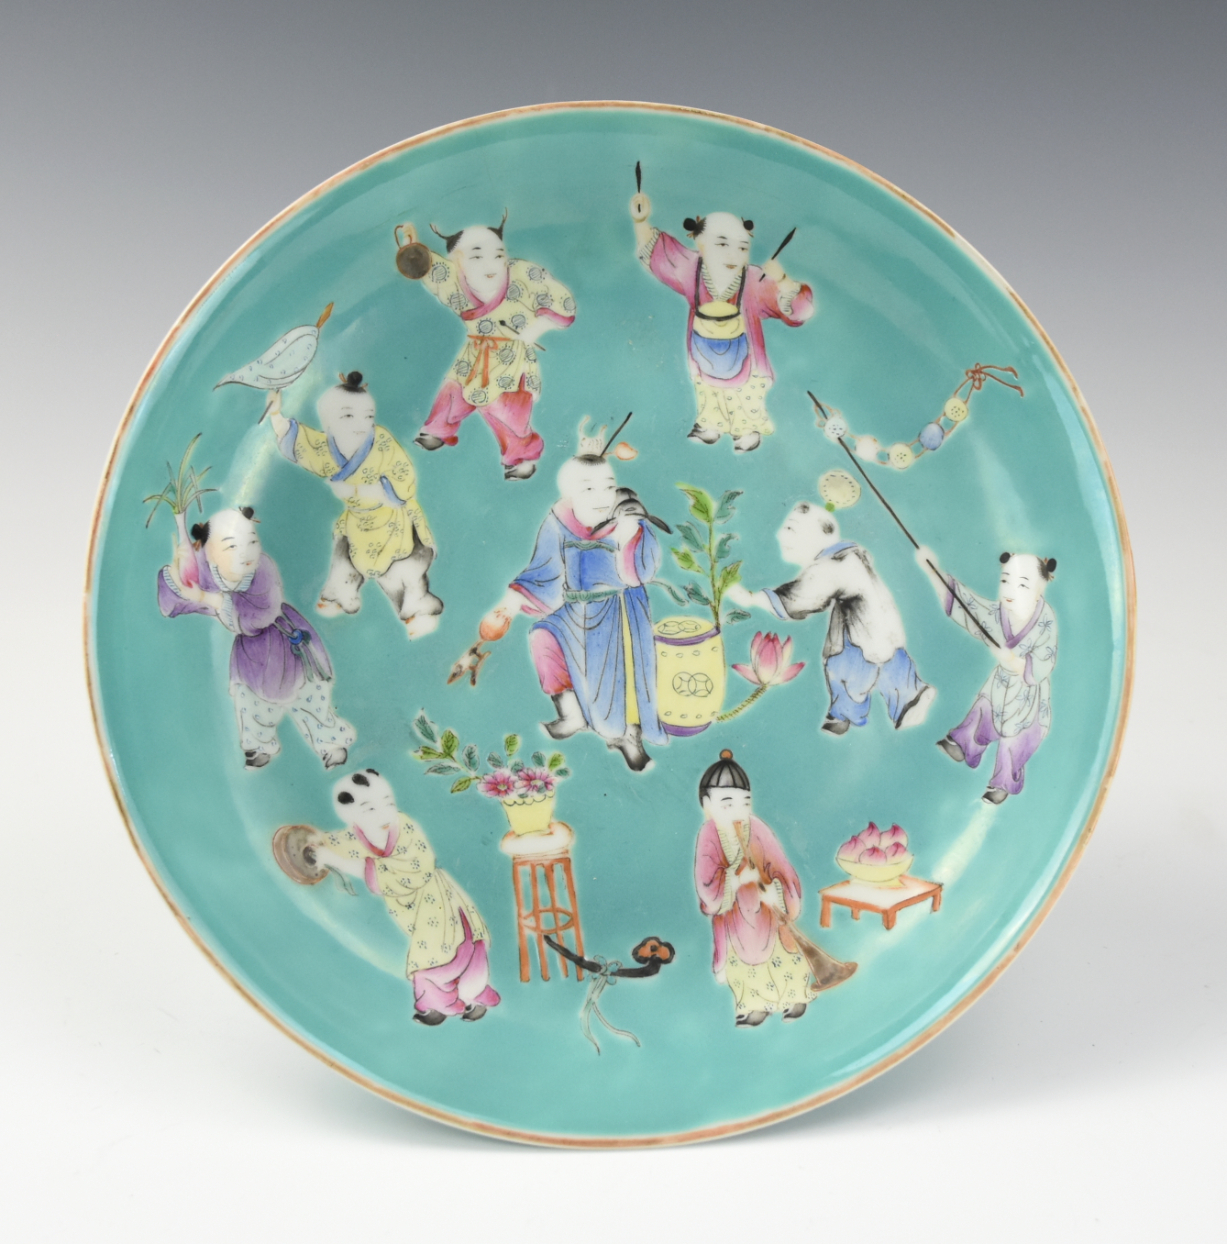 CHINESE TURQUOISE GROUND FAMILLE 2ced39